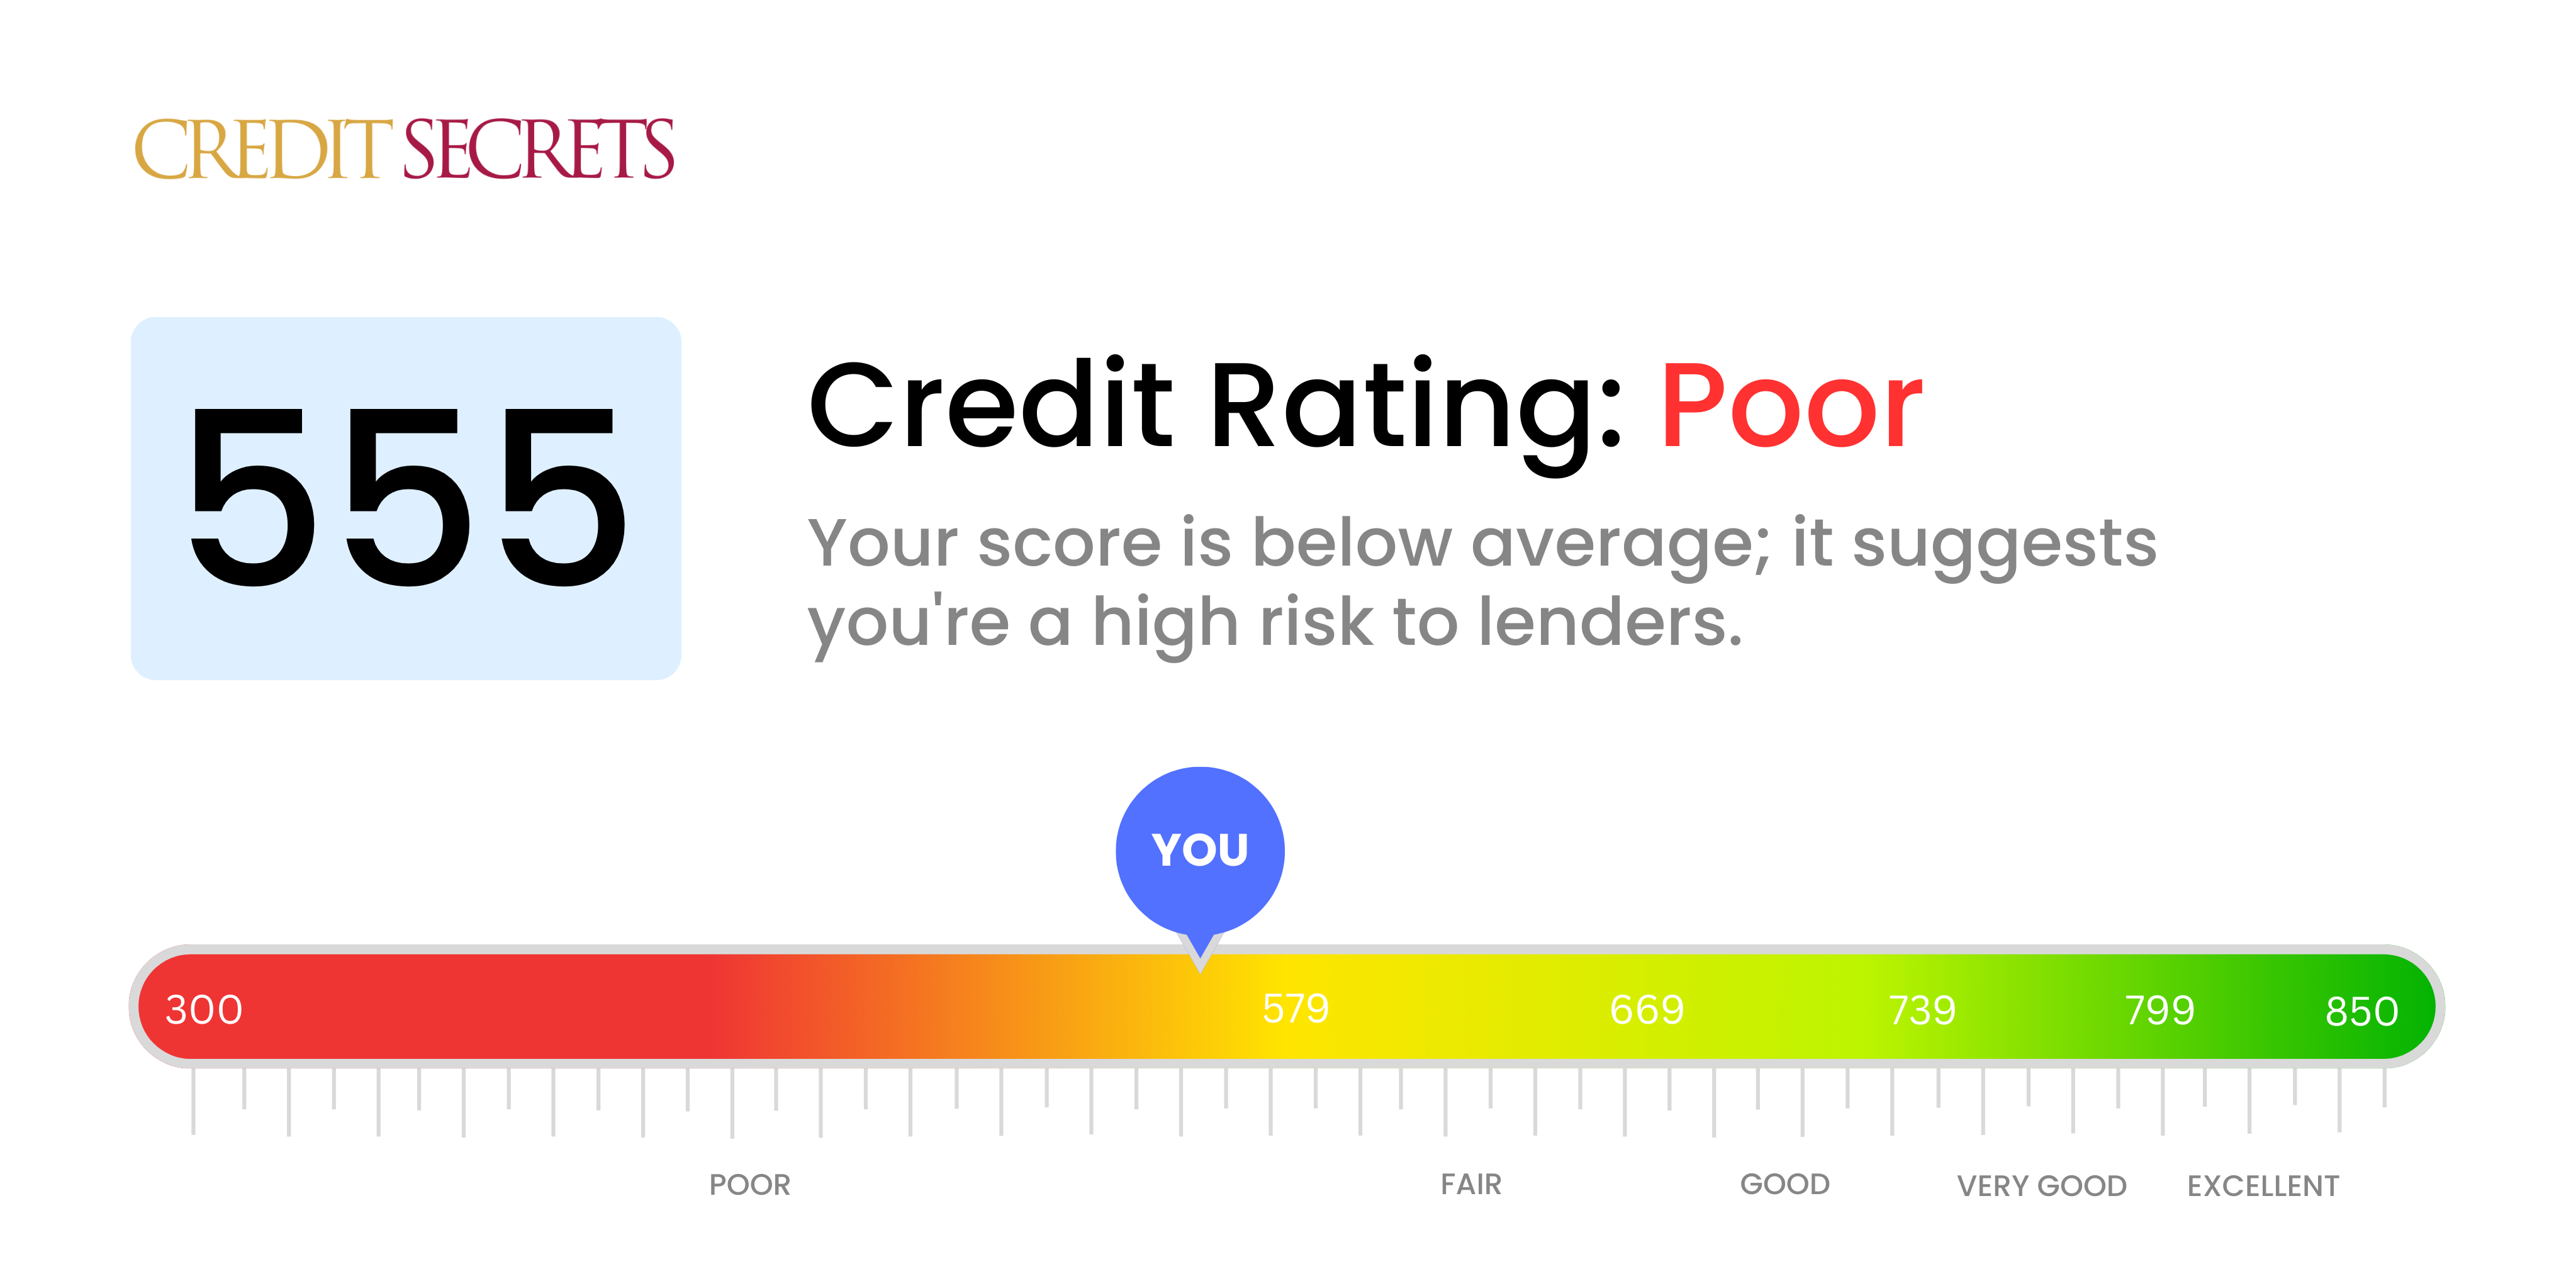 Is 555 a good credit score?